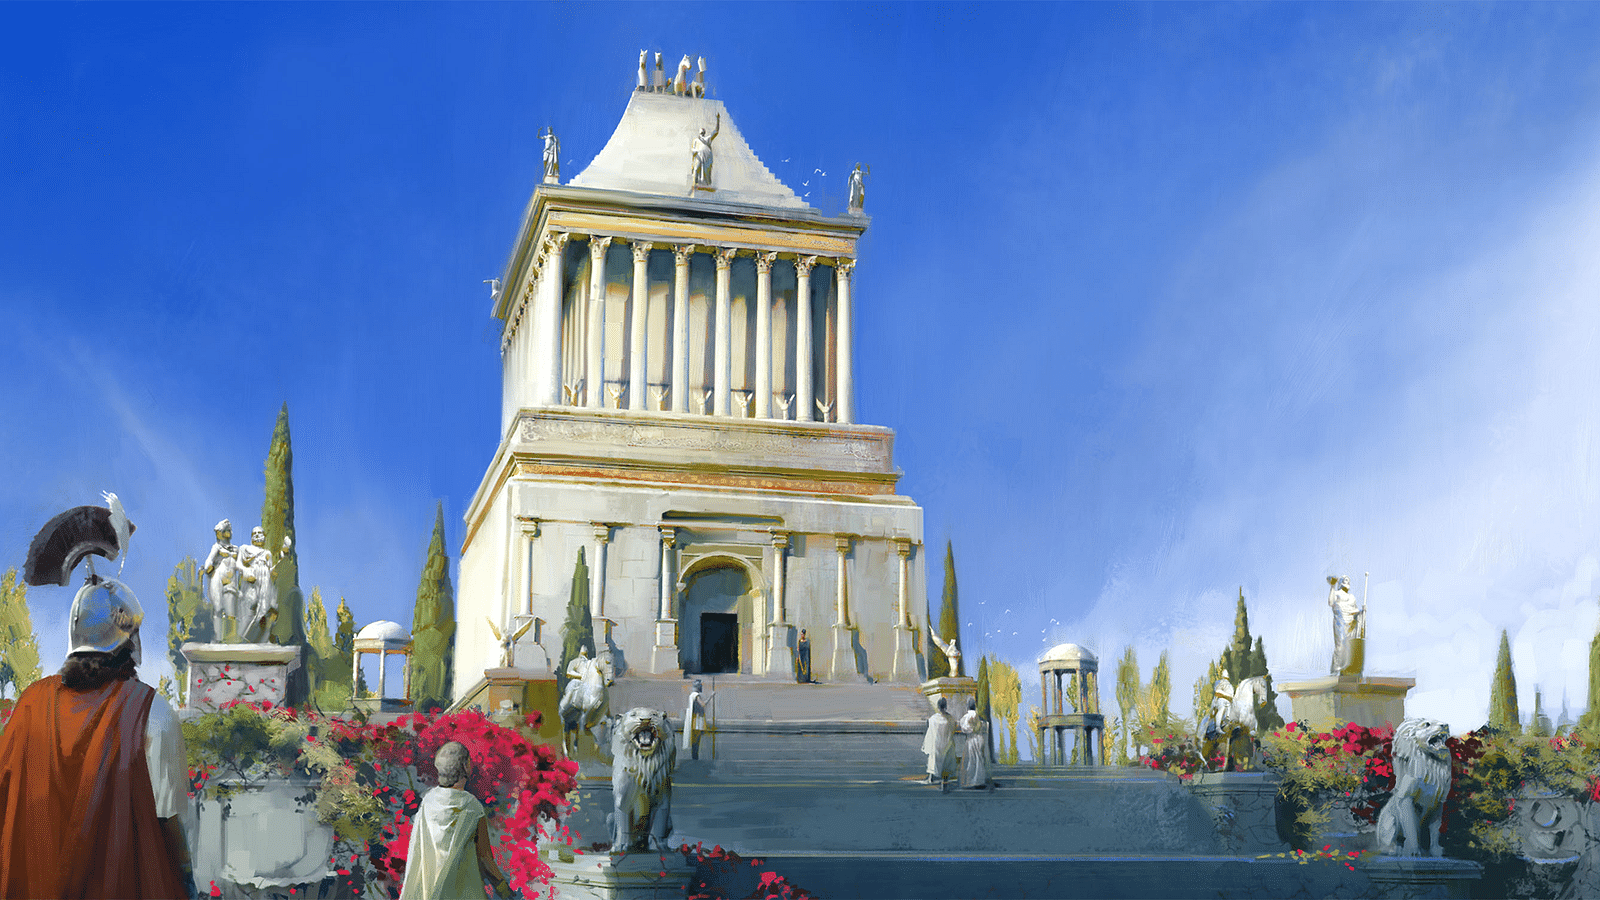 The Mausoleum at Halicarnassus: A Tribute to Eternity